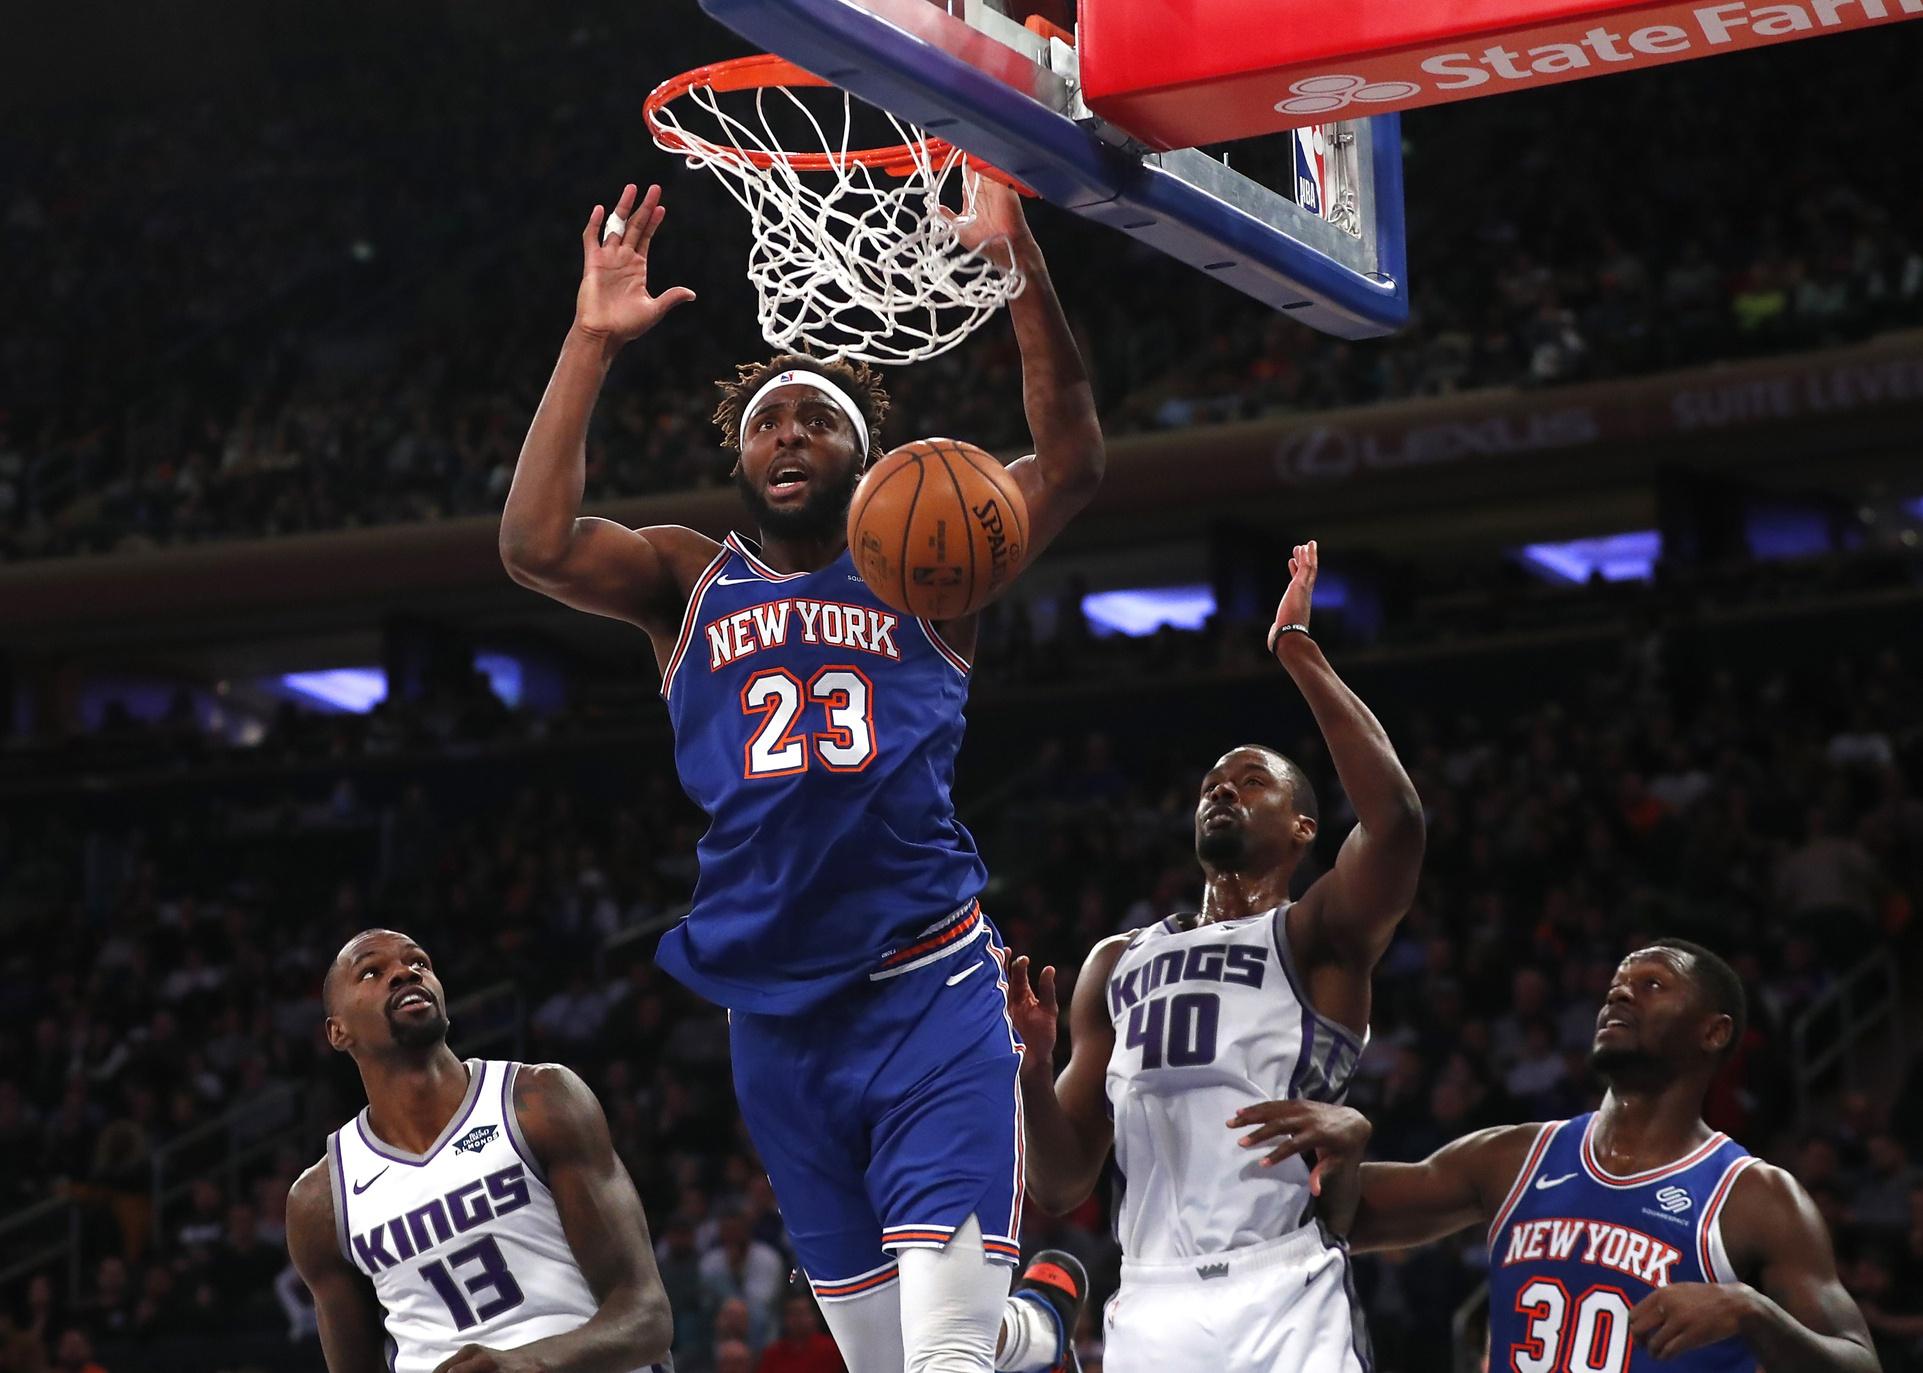 Nov 3, 2019; New York, NY, USA; New York Knicks center Mitchell Robinson (23) scores a basket against the Sacramento Kings during the second half at Madison Square Garden. / Noah K. Murray/USA TODAY Sports